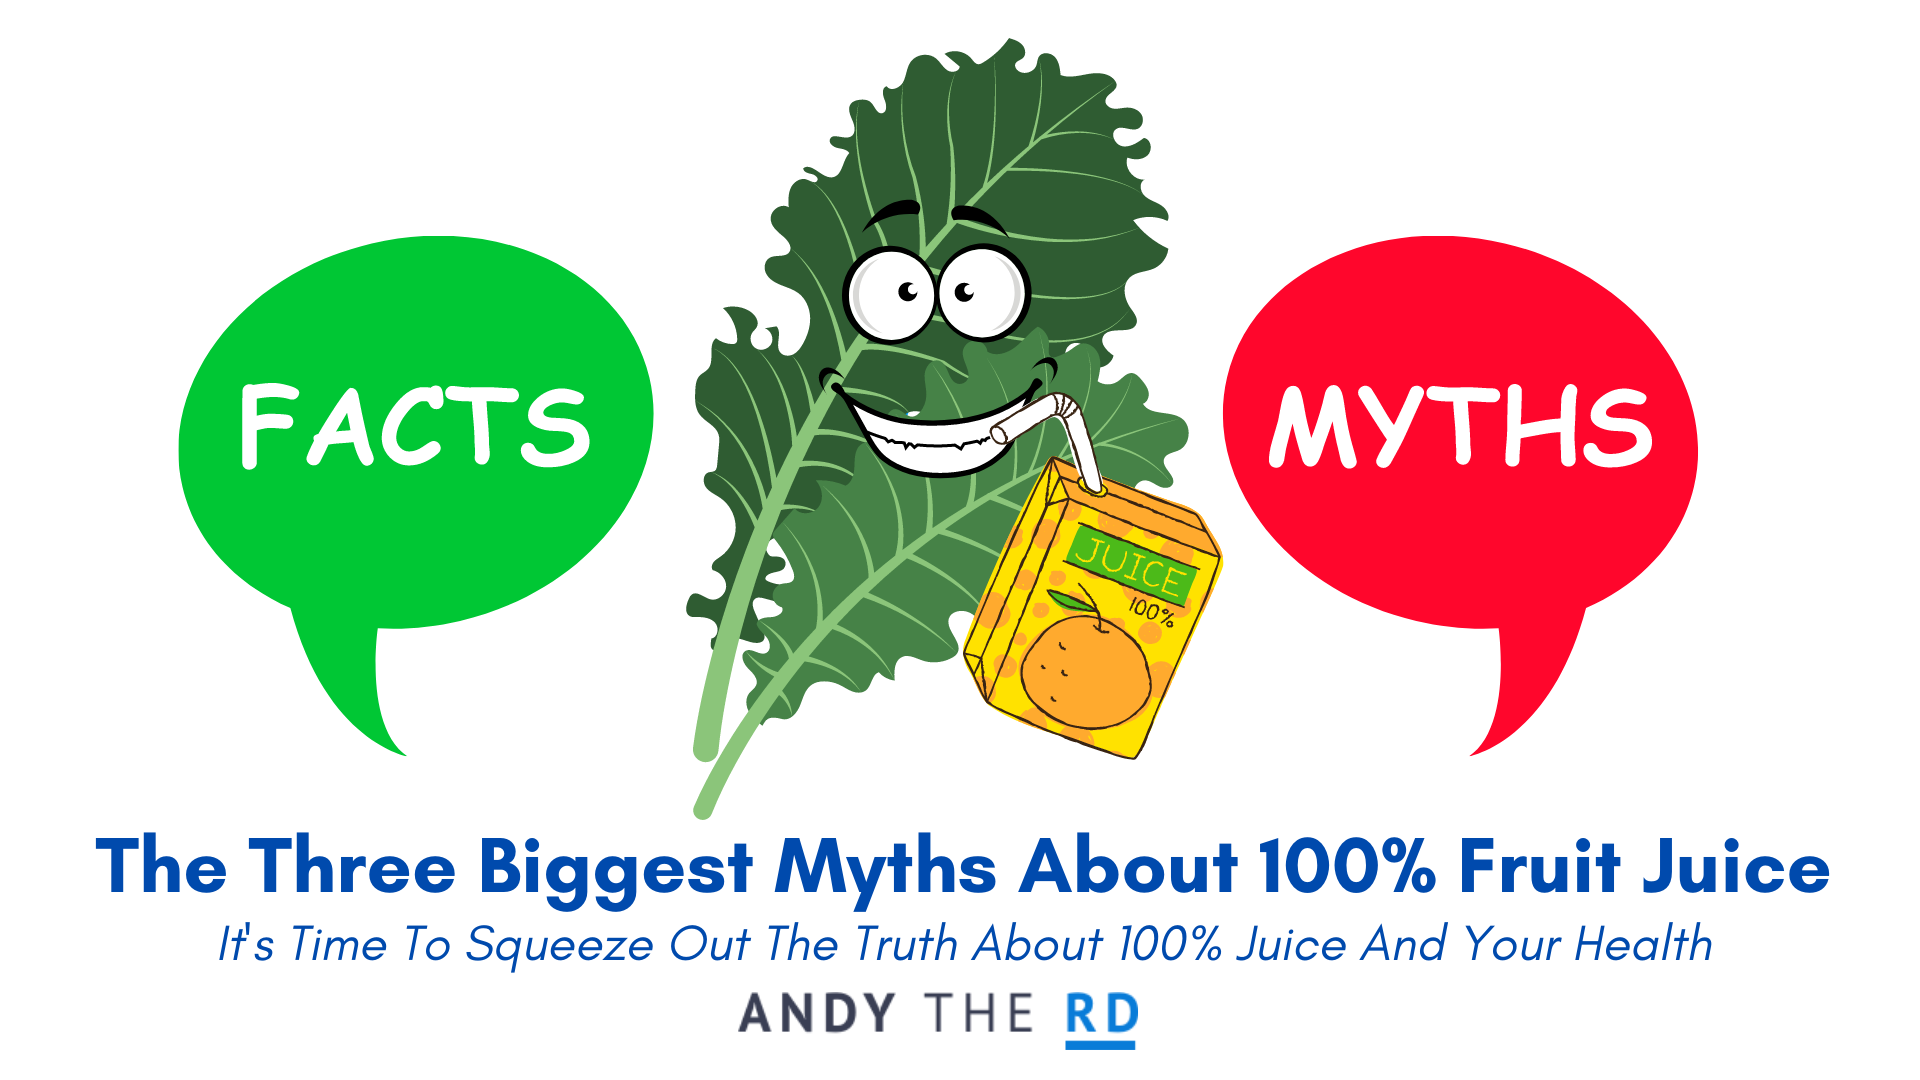 The Three Biggest Myths About 100% Fruit Juice